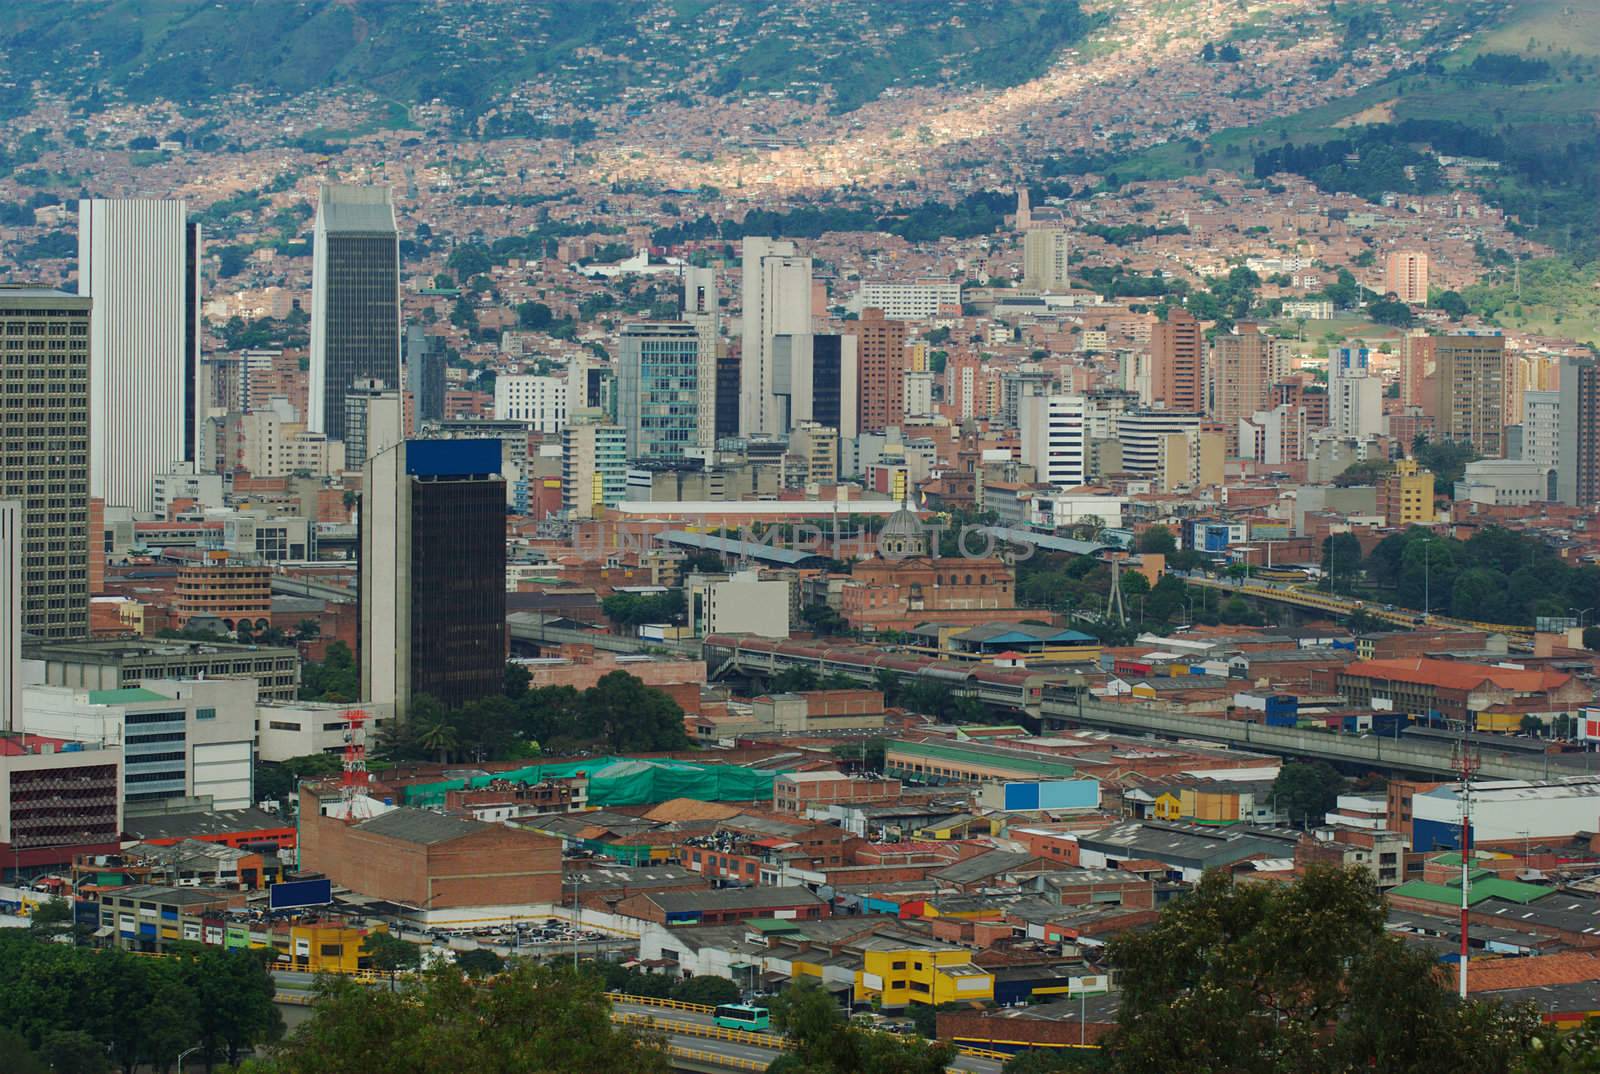 The city center of Medellin, the second biggest city in Colombia, which is the capital of the Department of Antioquia